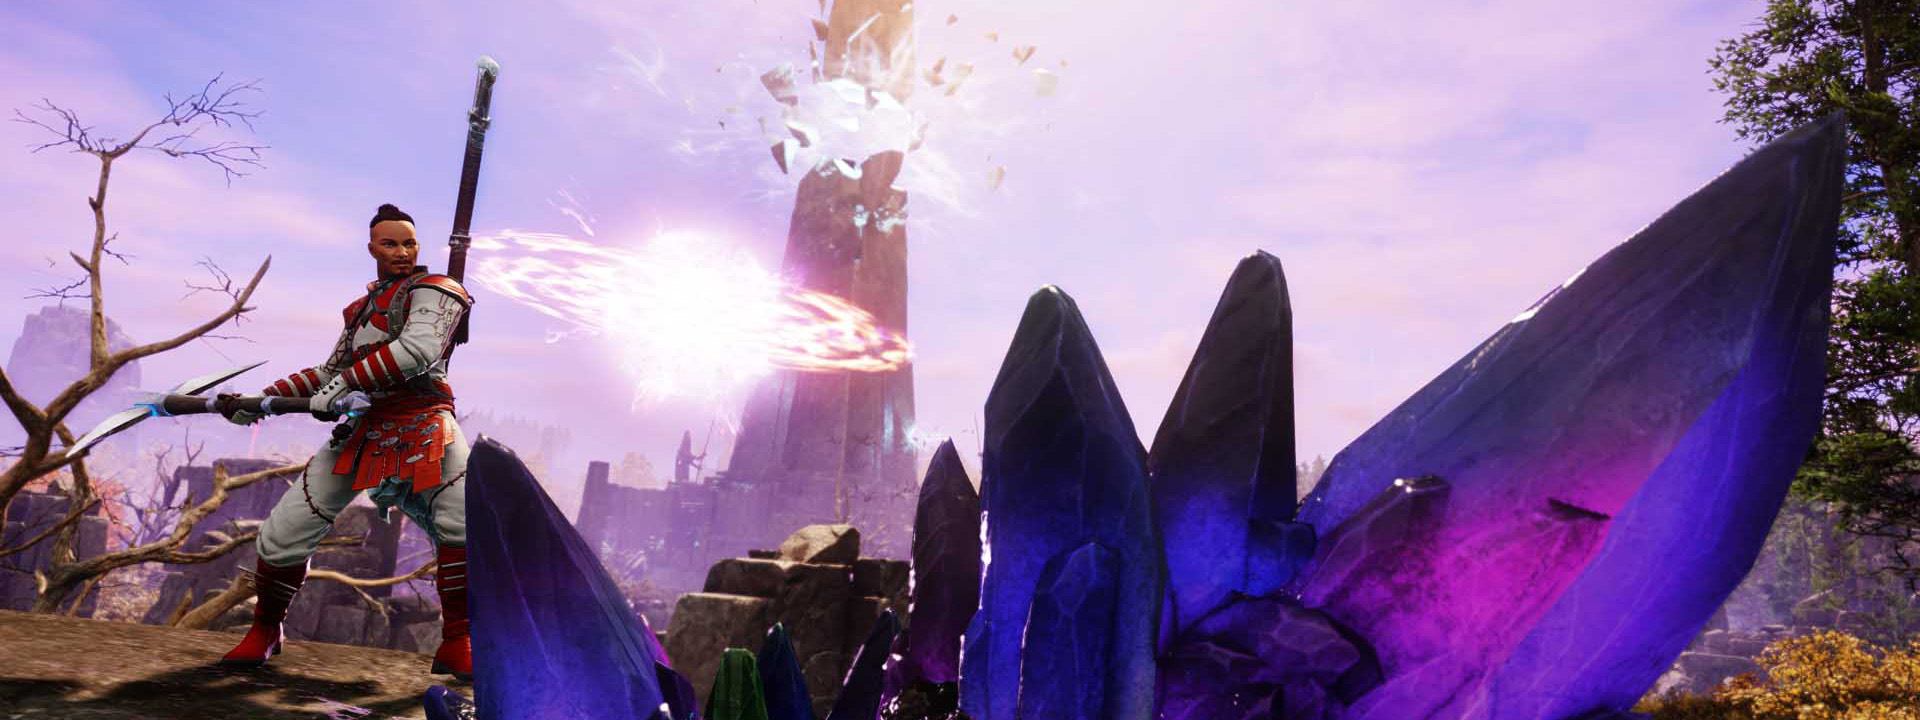 Mining Gleamite in front of the Shattered Obelisk.